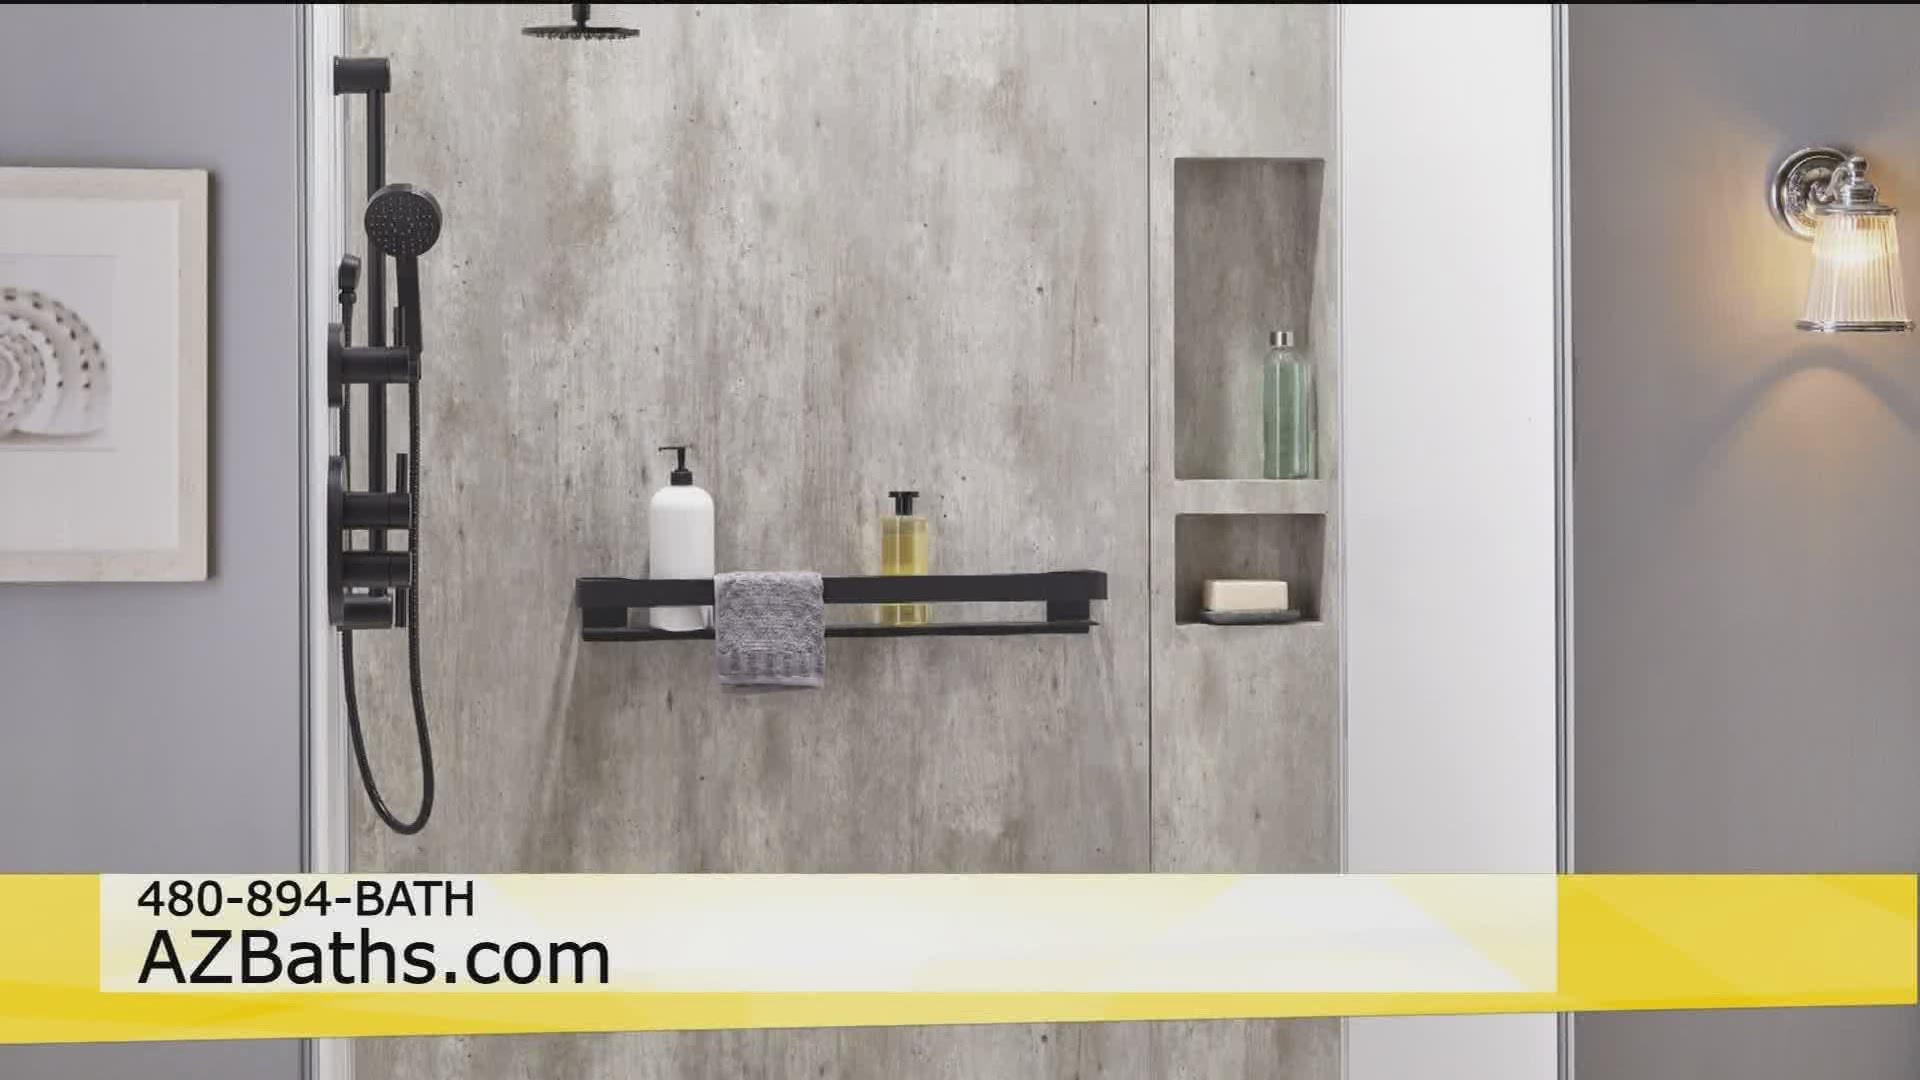 Brian Gottieb, President of Jacuzzi Bath Remodel AZ, shows us some of the bathroom remodels and how you can get a virtual consultation